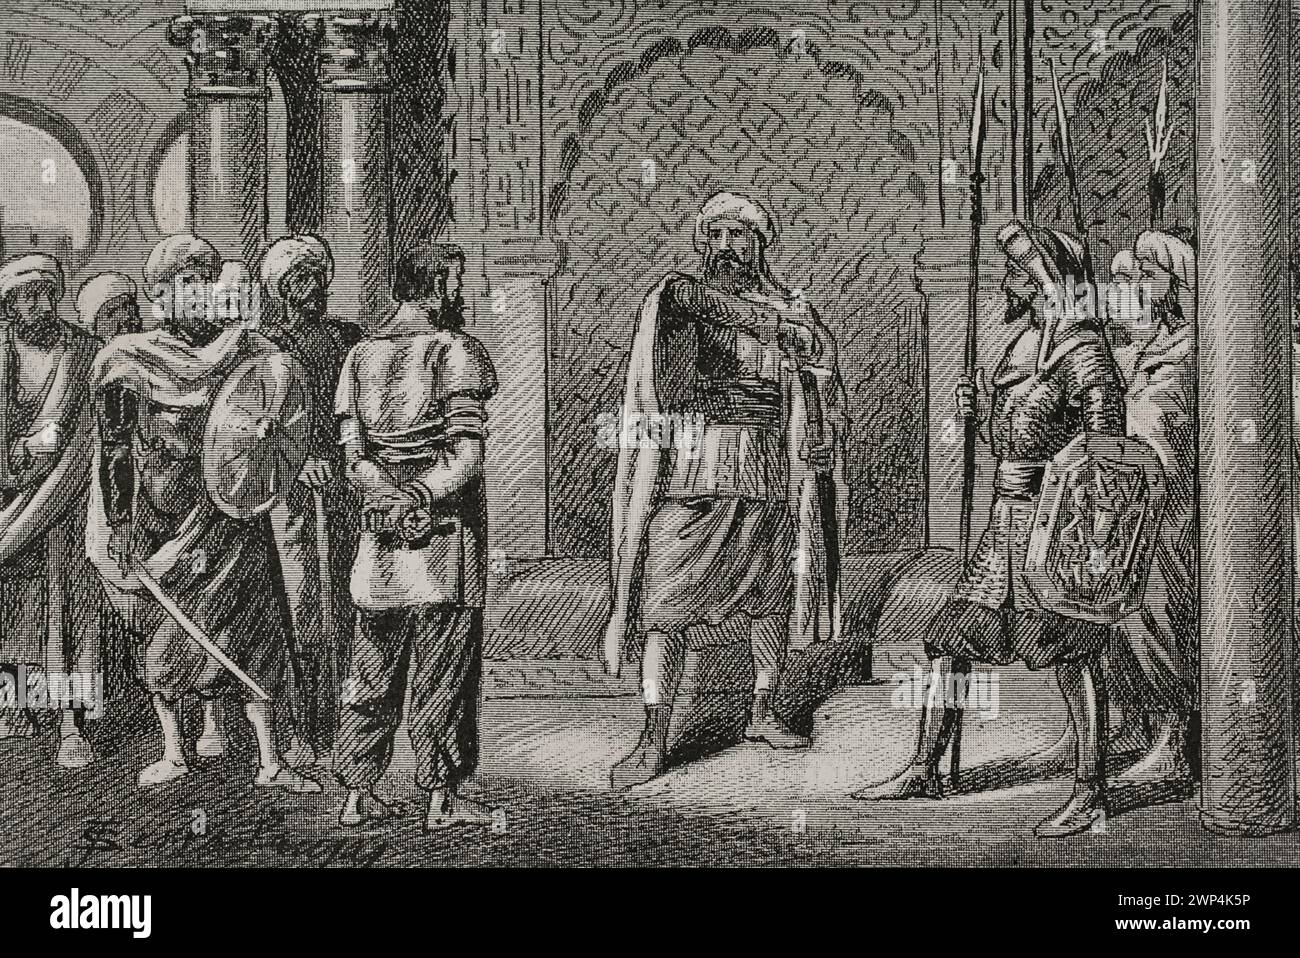 Ali ibn Hammud al-Nasir (d. 1018). Sixth caliph of the Caliphate of Córdoba (1016-1018). He was appointed governor of Ceuta by Caliph Sulayman al-Musta'in. Ali ibn Hammud conspired against the Caliph Sulayman al-Musta'in and, after gaining entry into Córdoba, was proclaimed Caliph on 1 July 1016. He ordered Sulayman, his father and brother to be imprisoned and killed. '... Seized Sulayman and ordered behead him'. Engraving by Serra Pausas. 'Glorias Españolas' (Glories of Spain). Volume II. Published in Barcelona, 1890. Stock Photo